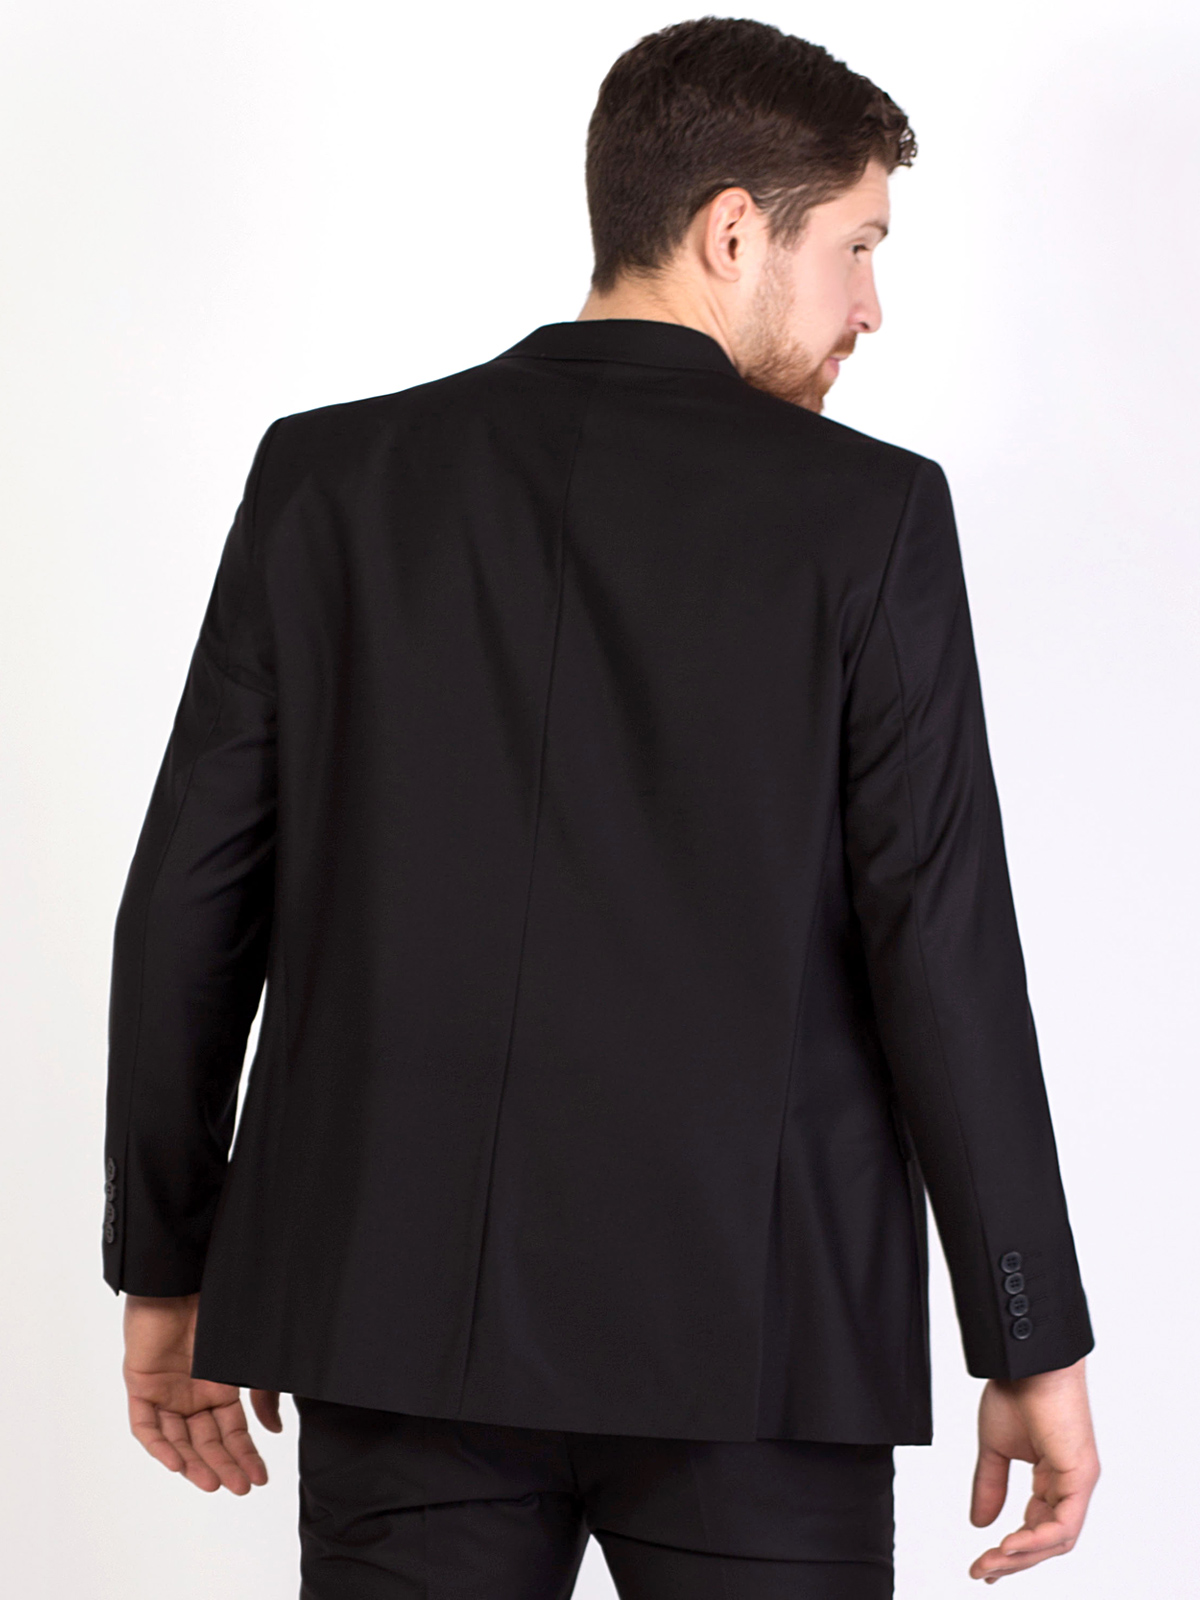  black classic jacket with fitted silhou - 64110 € 107.98 img4